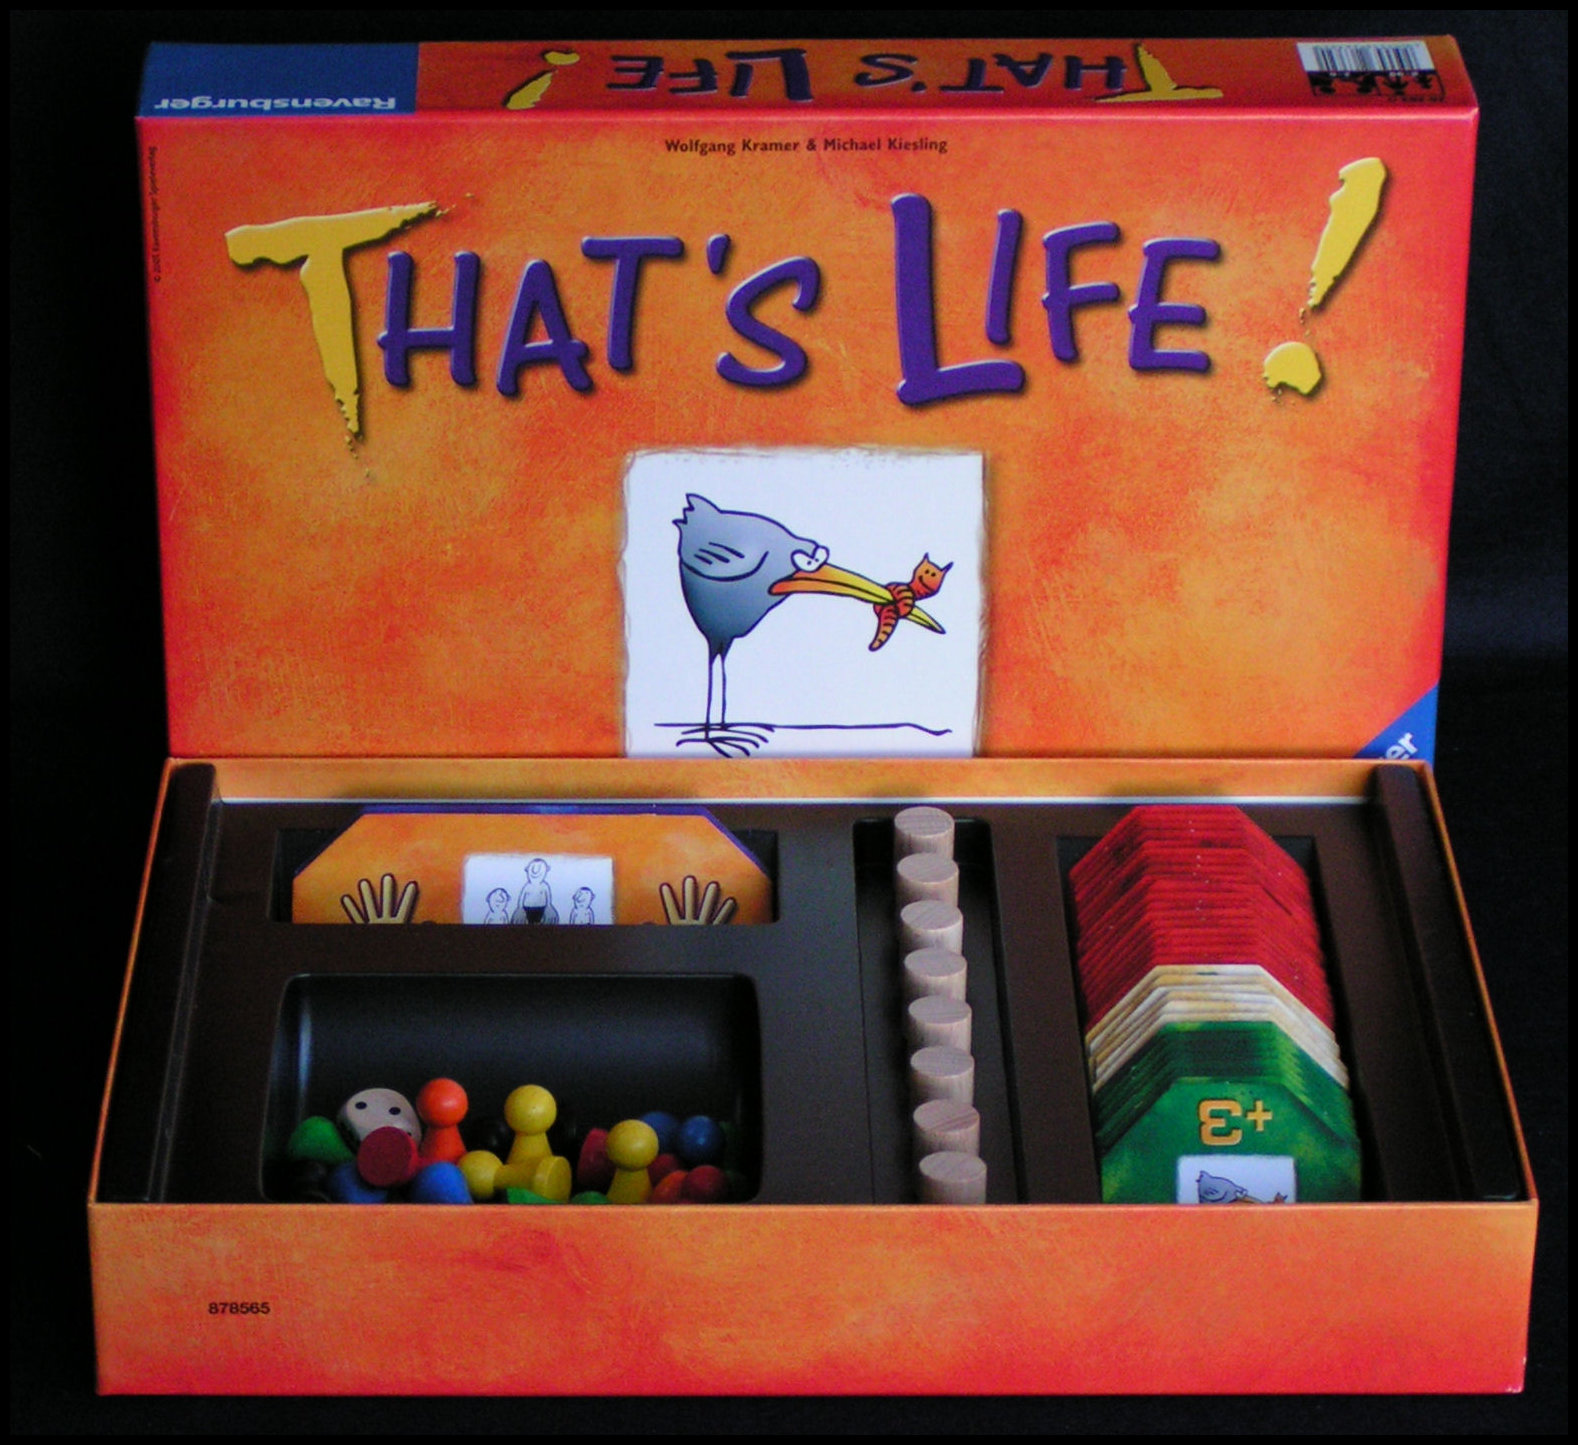 That's Life! - The Box Contents